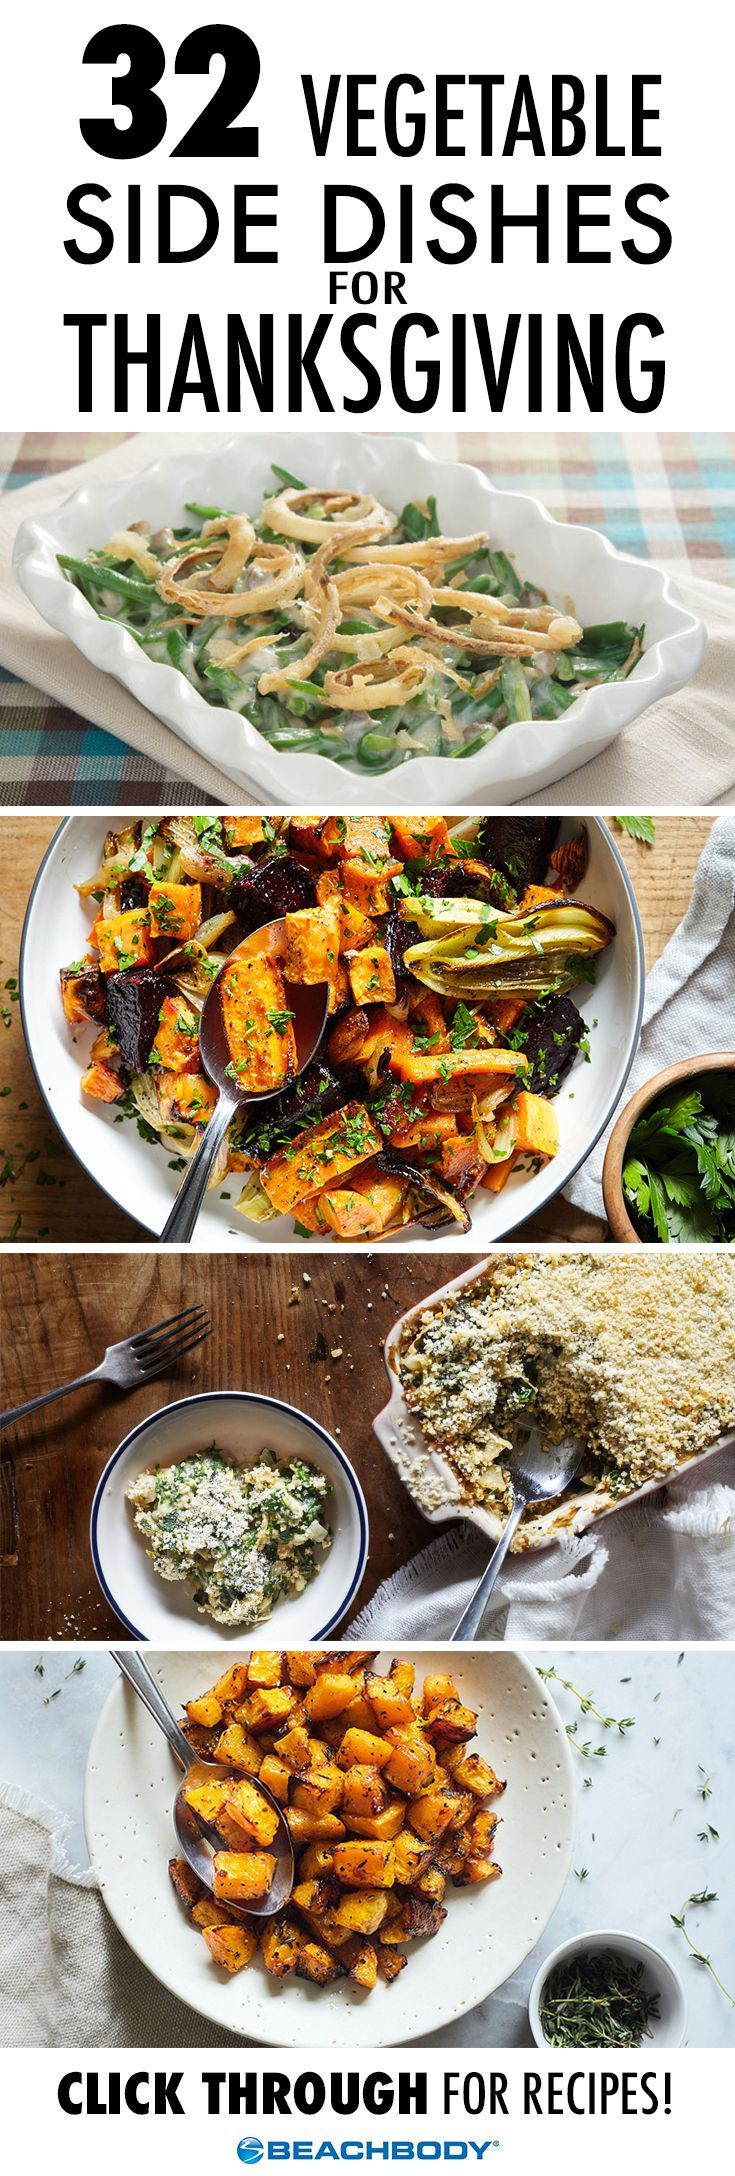 Thanksgiving Vegetable Recipes Side Dishes
 837 best images about Healthy Recipes on Pinterest